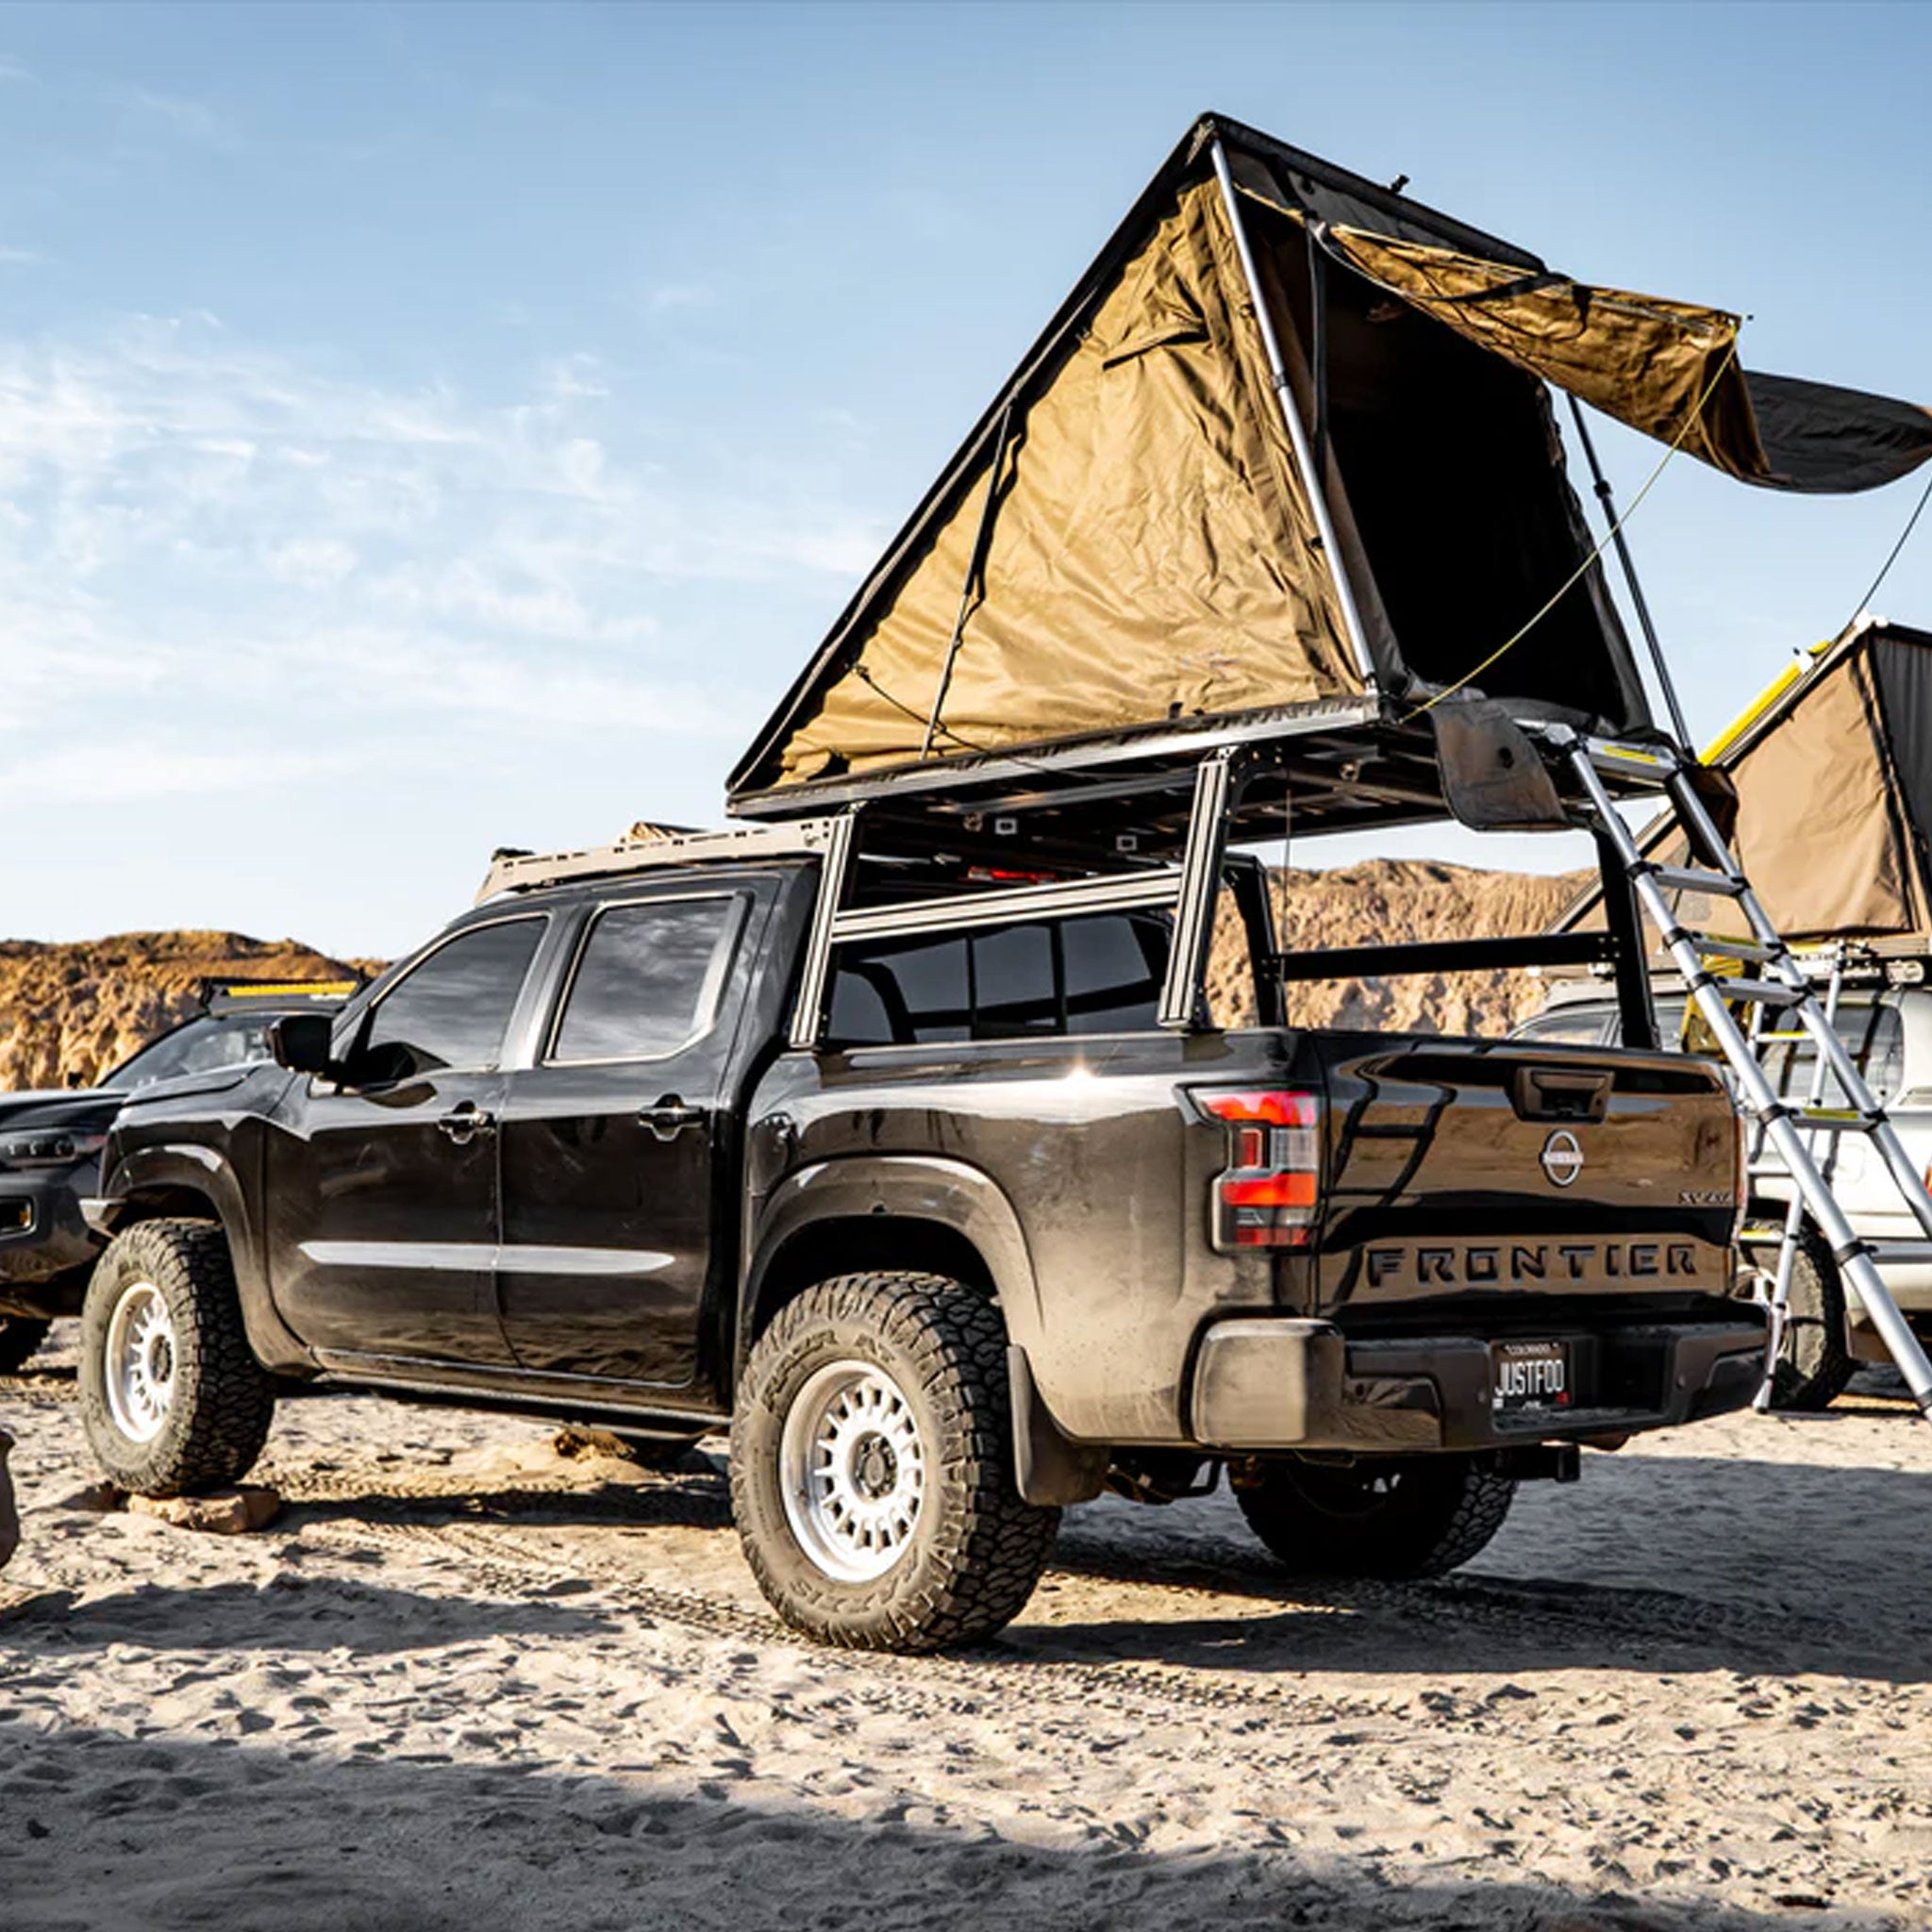 Nissan Frontier camping with XTR1 Overland bed rack and roof top tent